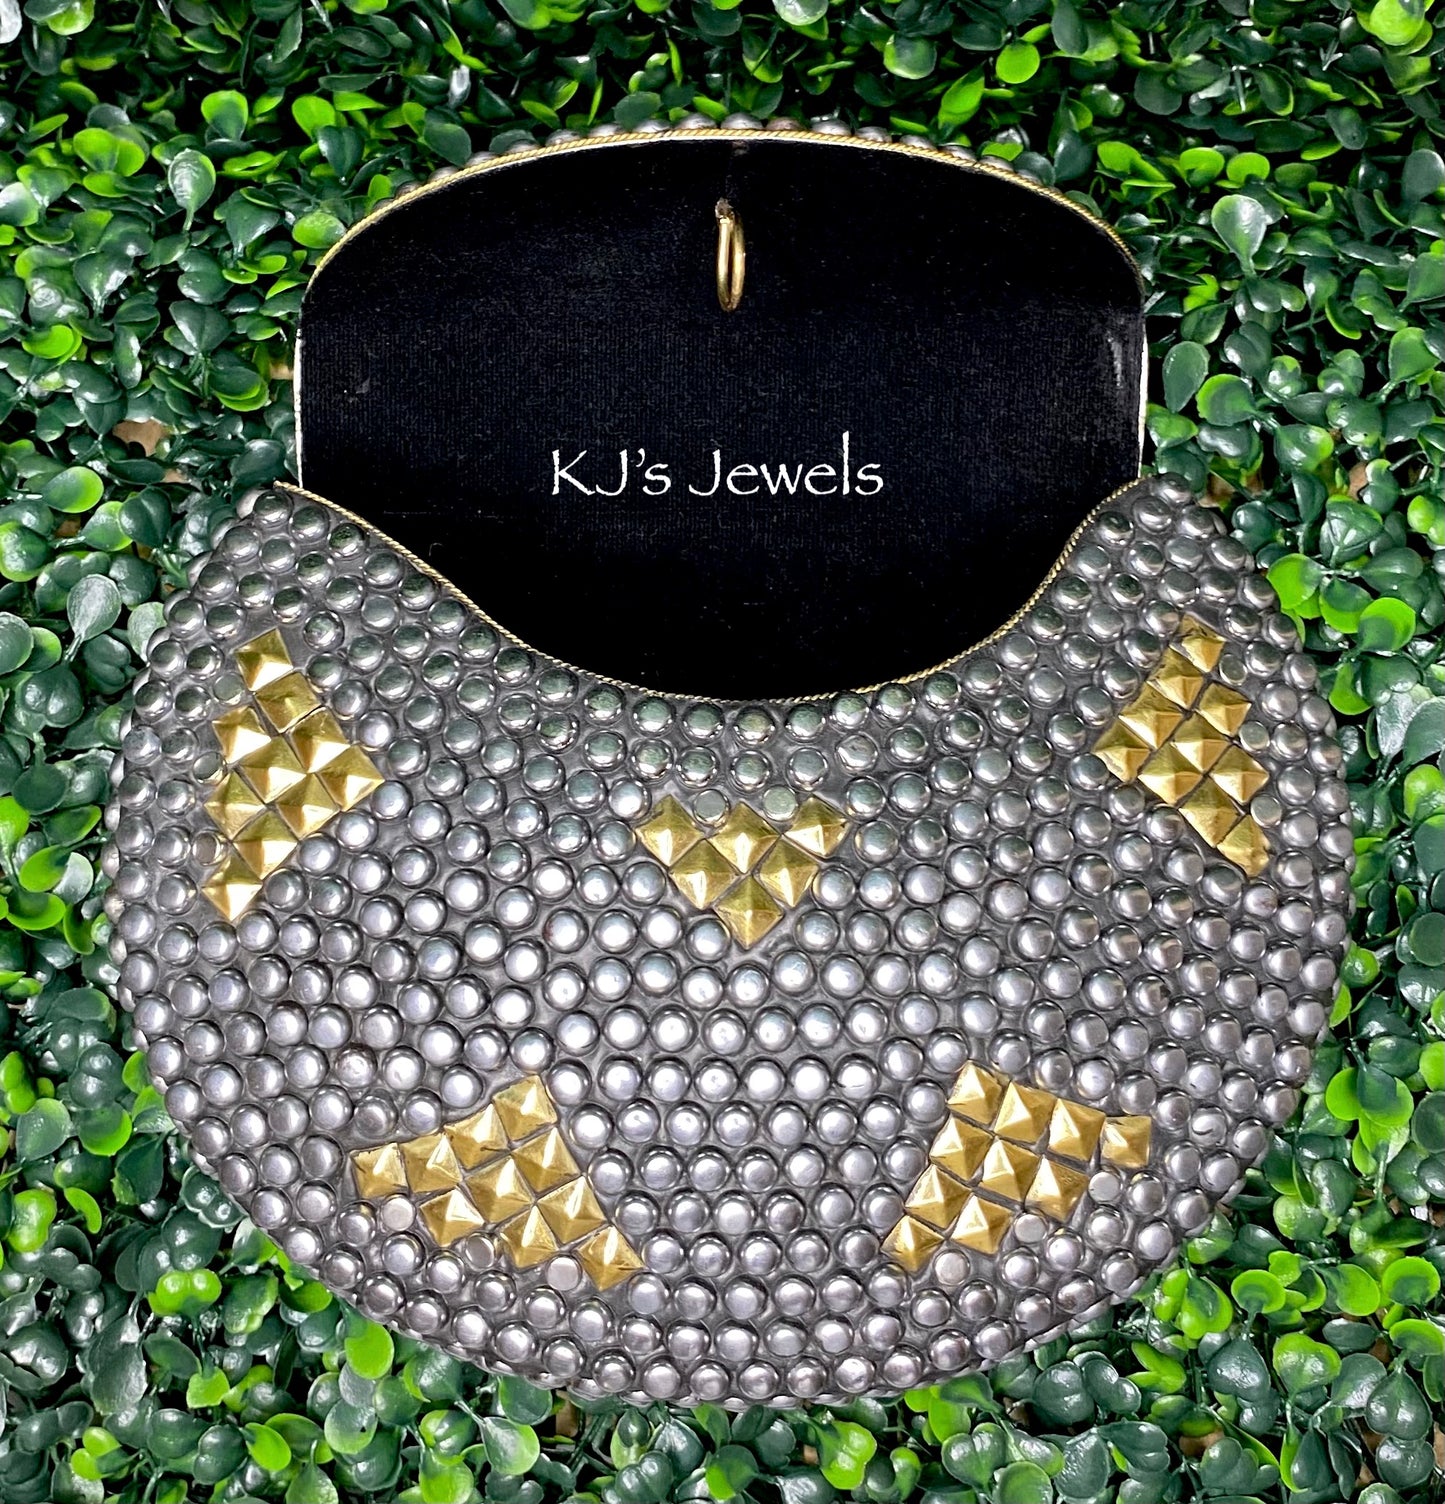 Pewter and Gold Metal Studded Bag